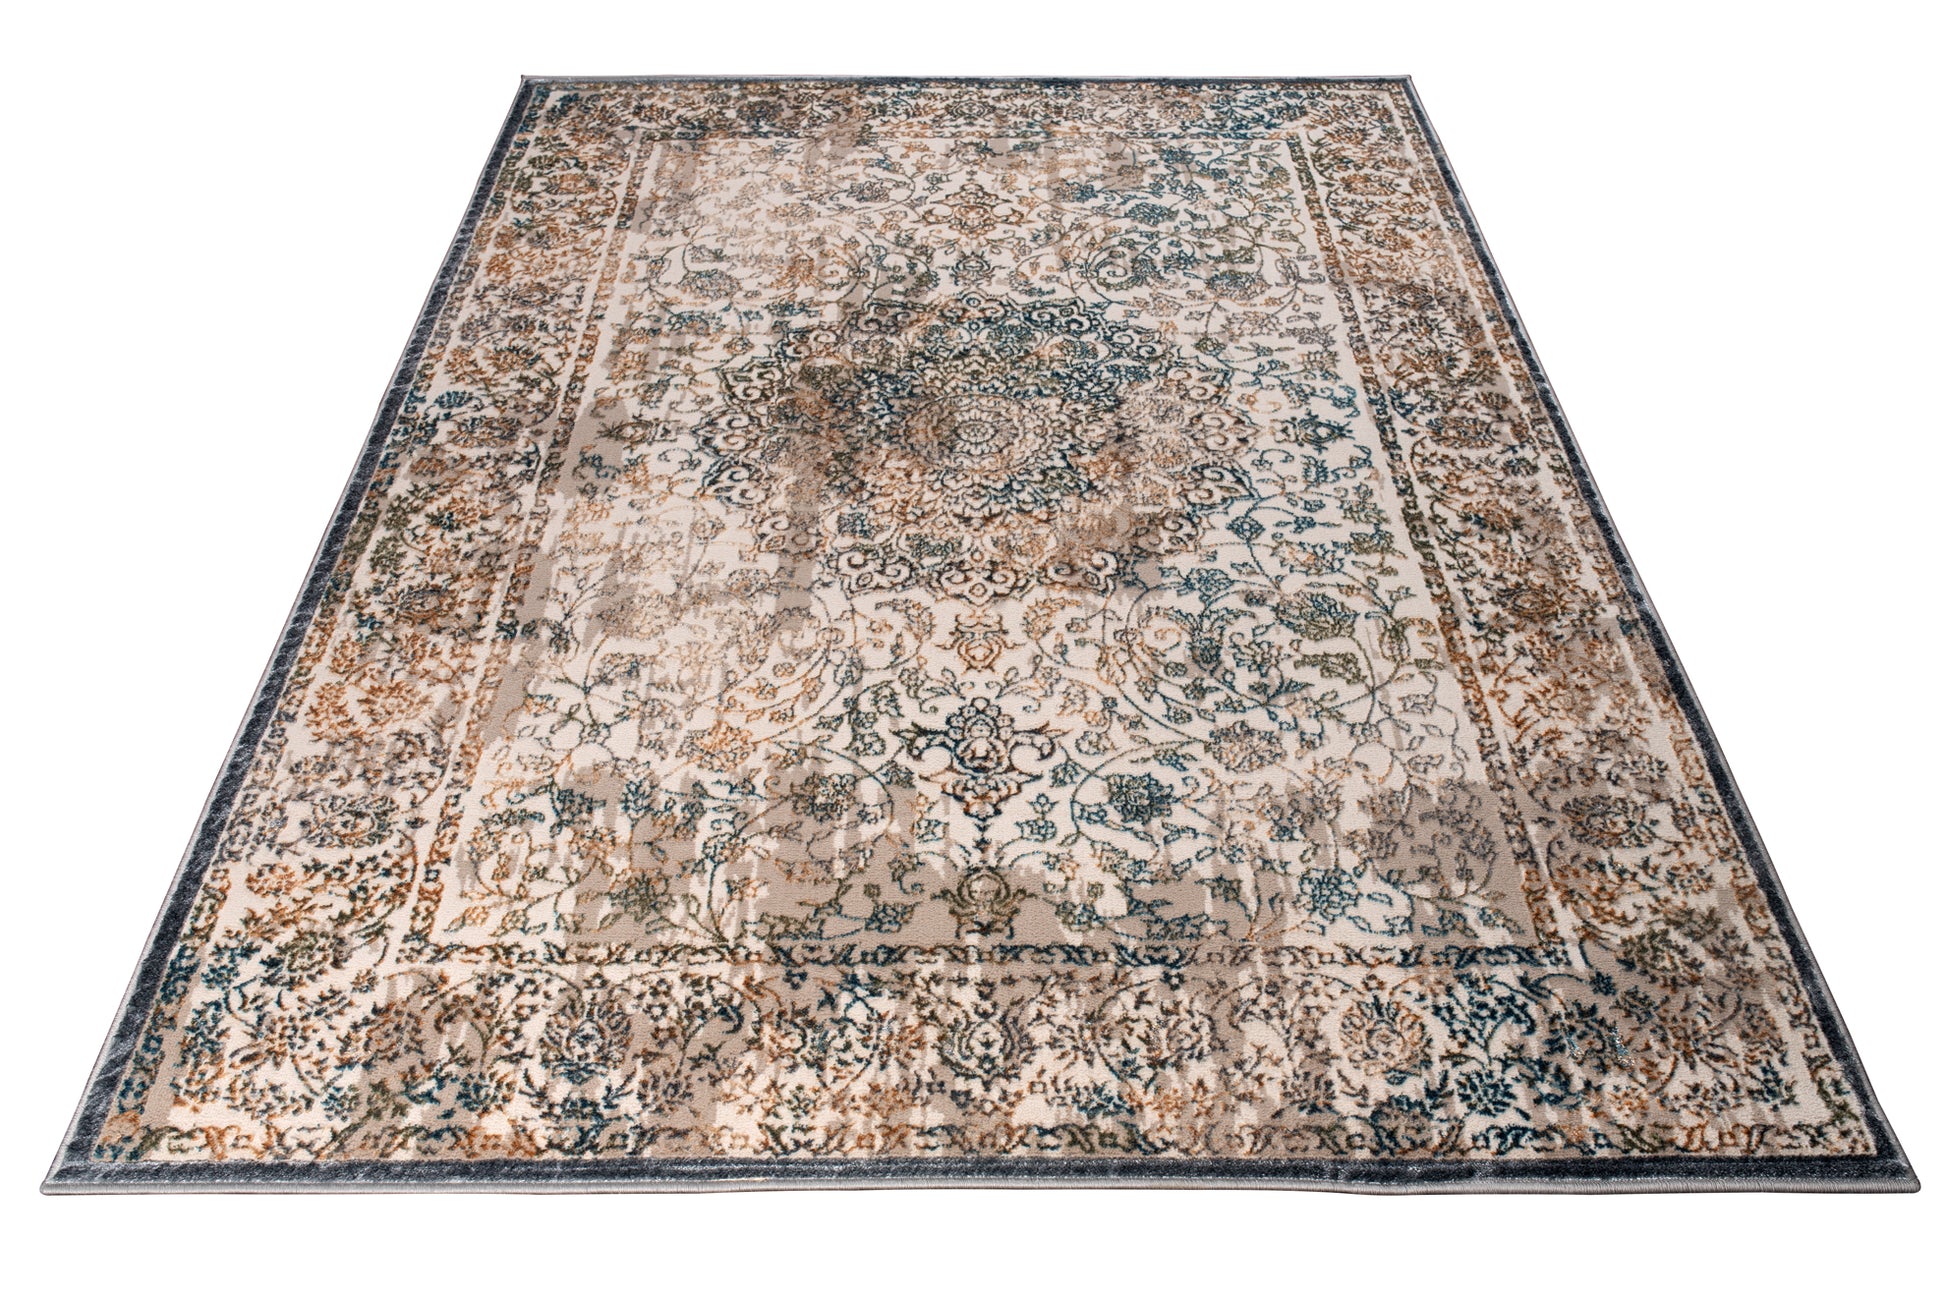 beige brown blue metalic traditional persian oriental contemporary area rug 6x8, 6x9 ft Living Room, Bedroom, Dining Area, Kitchen Carpet